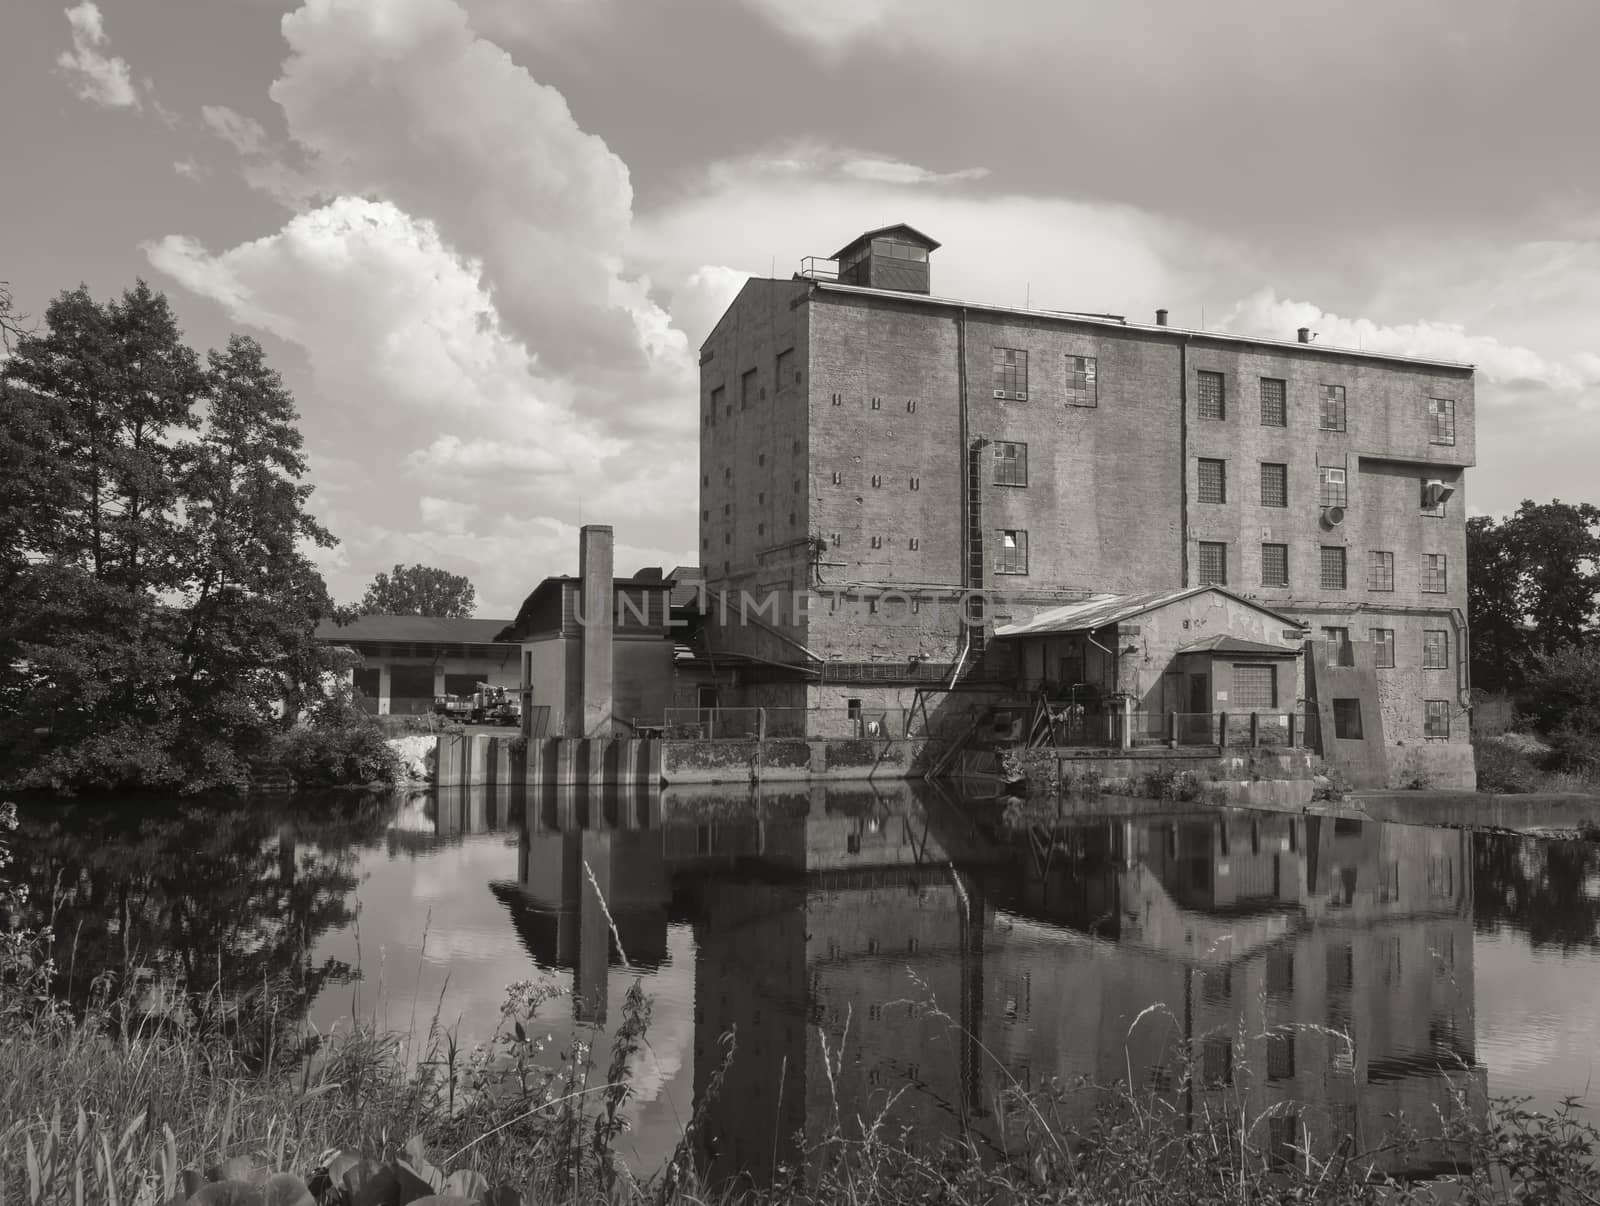 View accros Jizera river on abandoned, aged, dirty, empty industrial factory building in sepia tone toned, dramatic clouds and tree